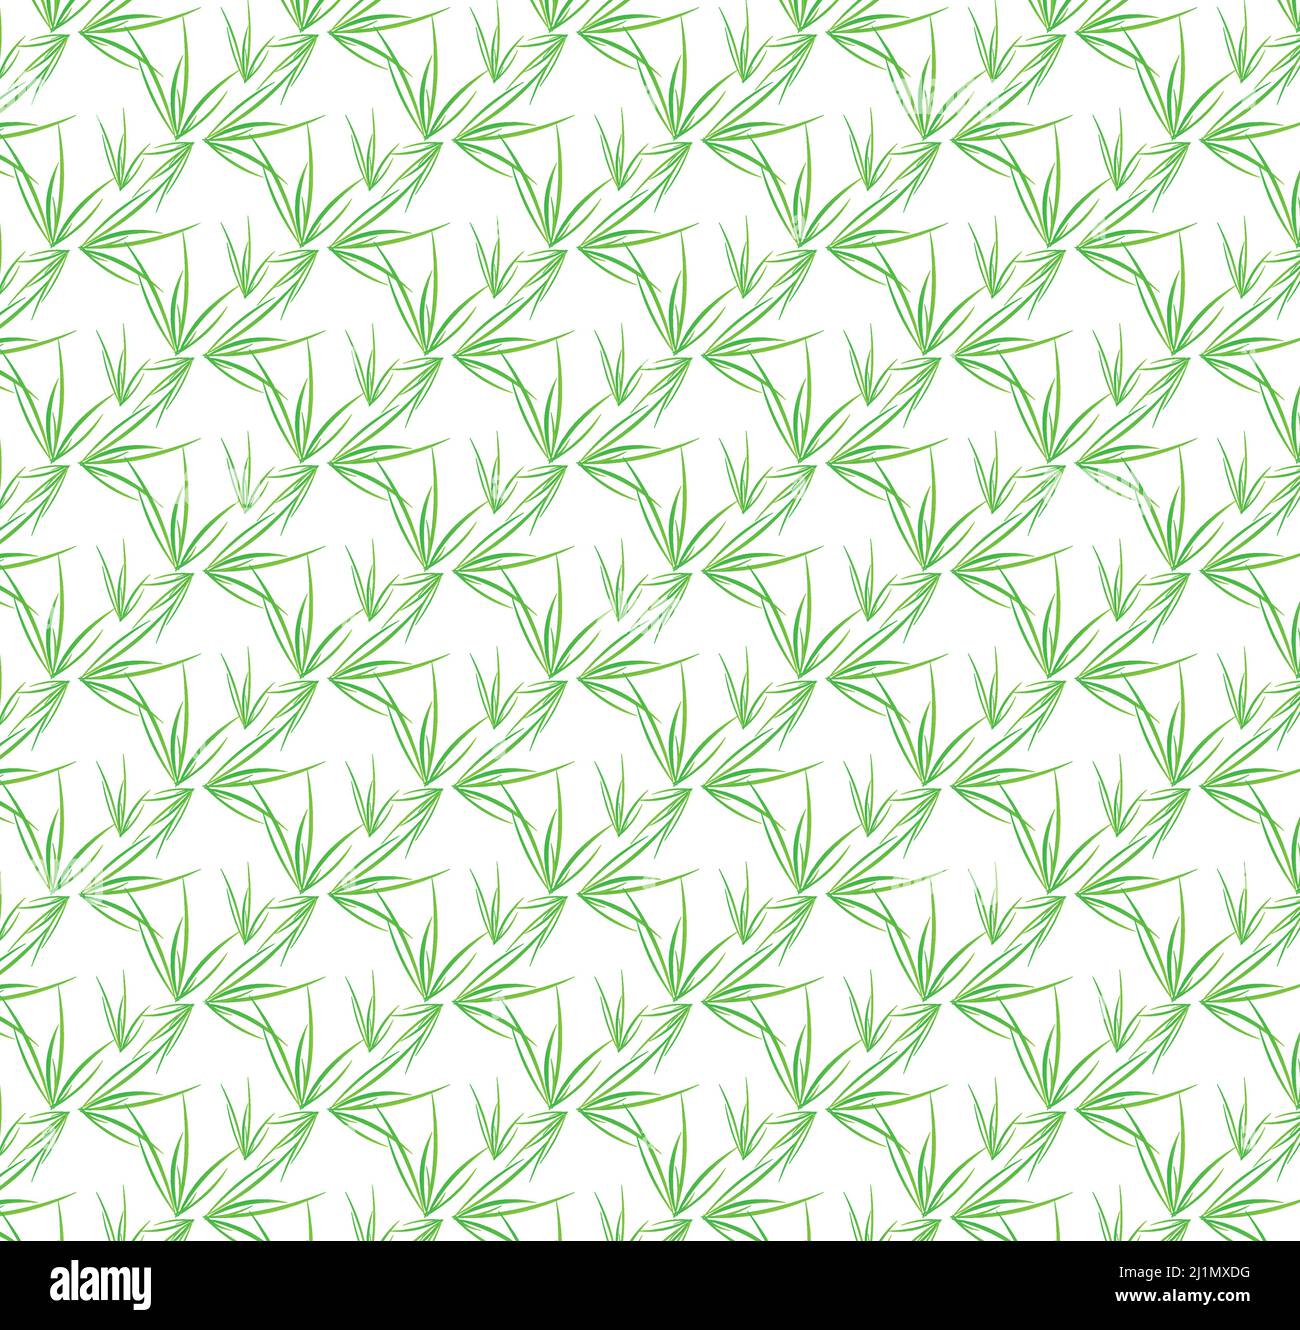 Grass Vector Seamless Repeting Pattern Stock Vector